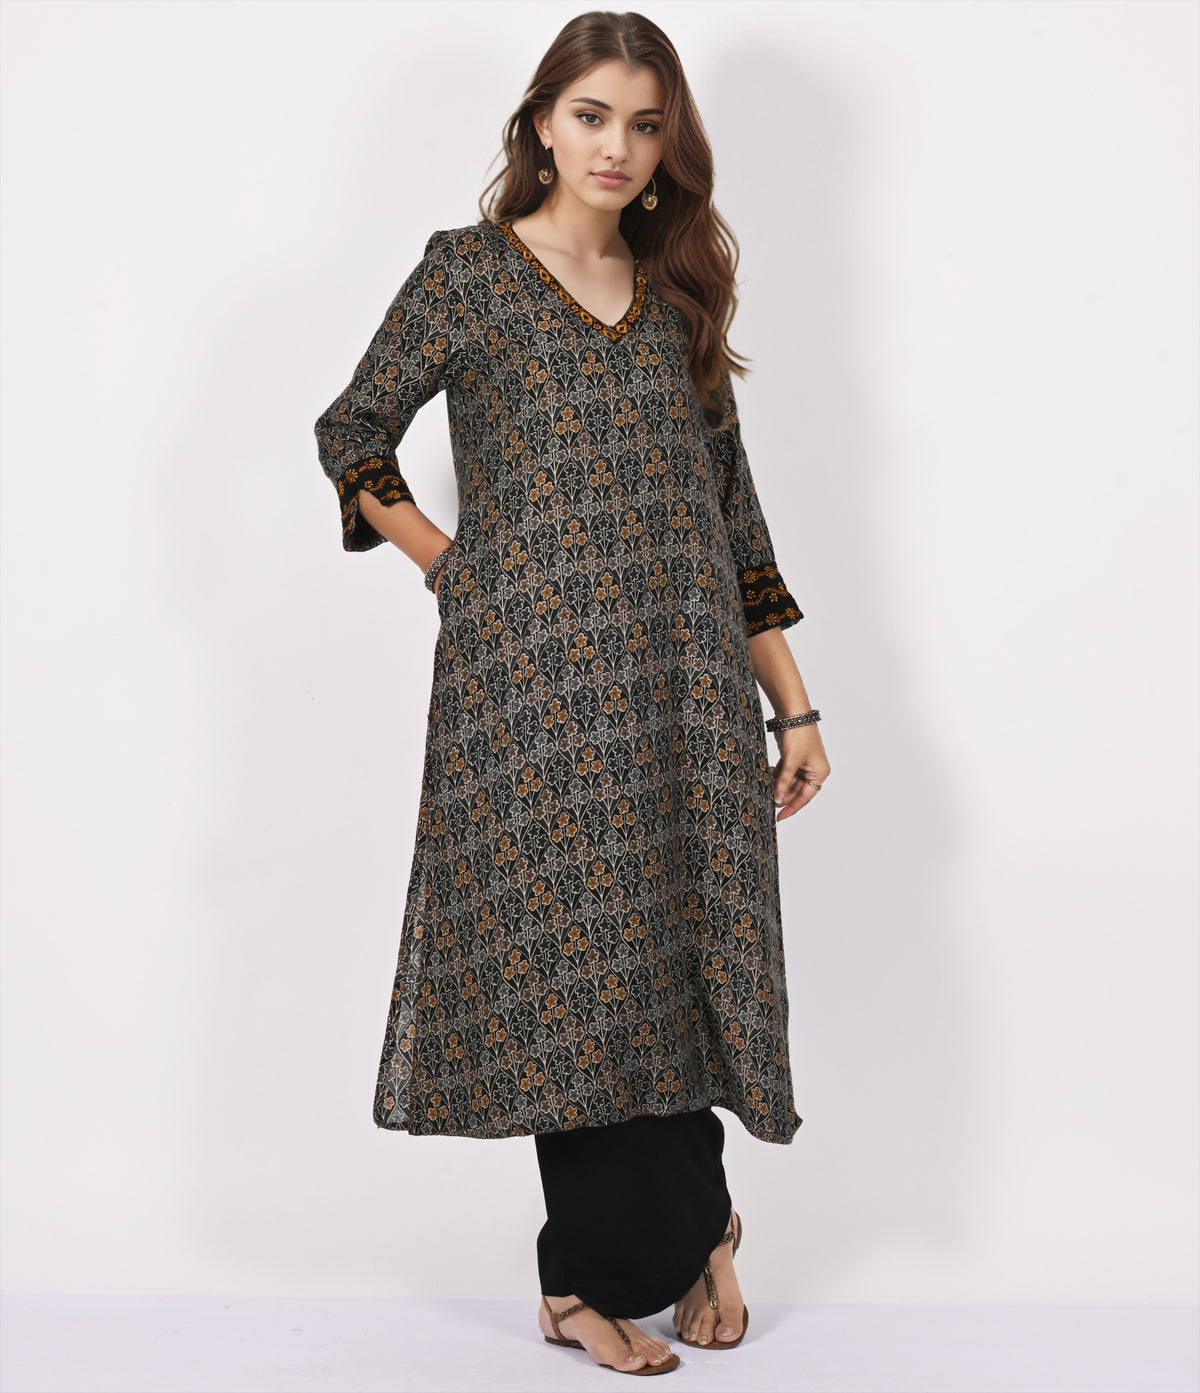 KASI Block Print Style Pure Cotton Hand Embroidered Long Tunic Dress; Made to Order/Customizable